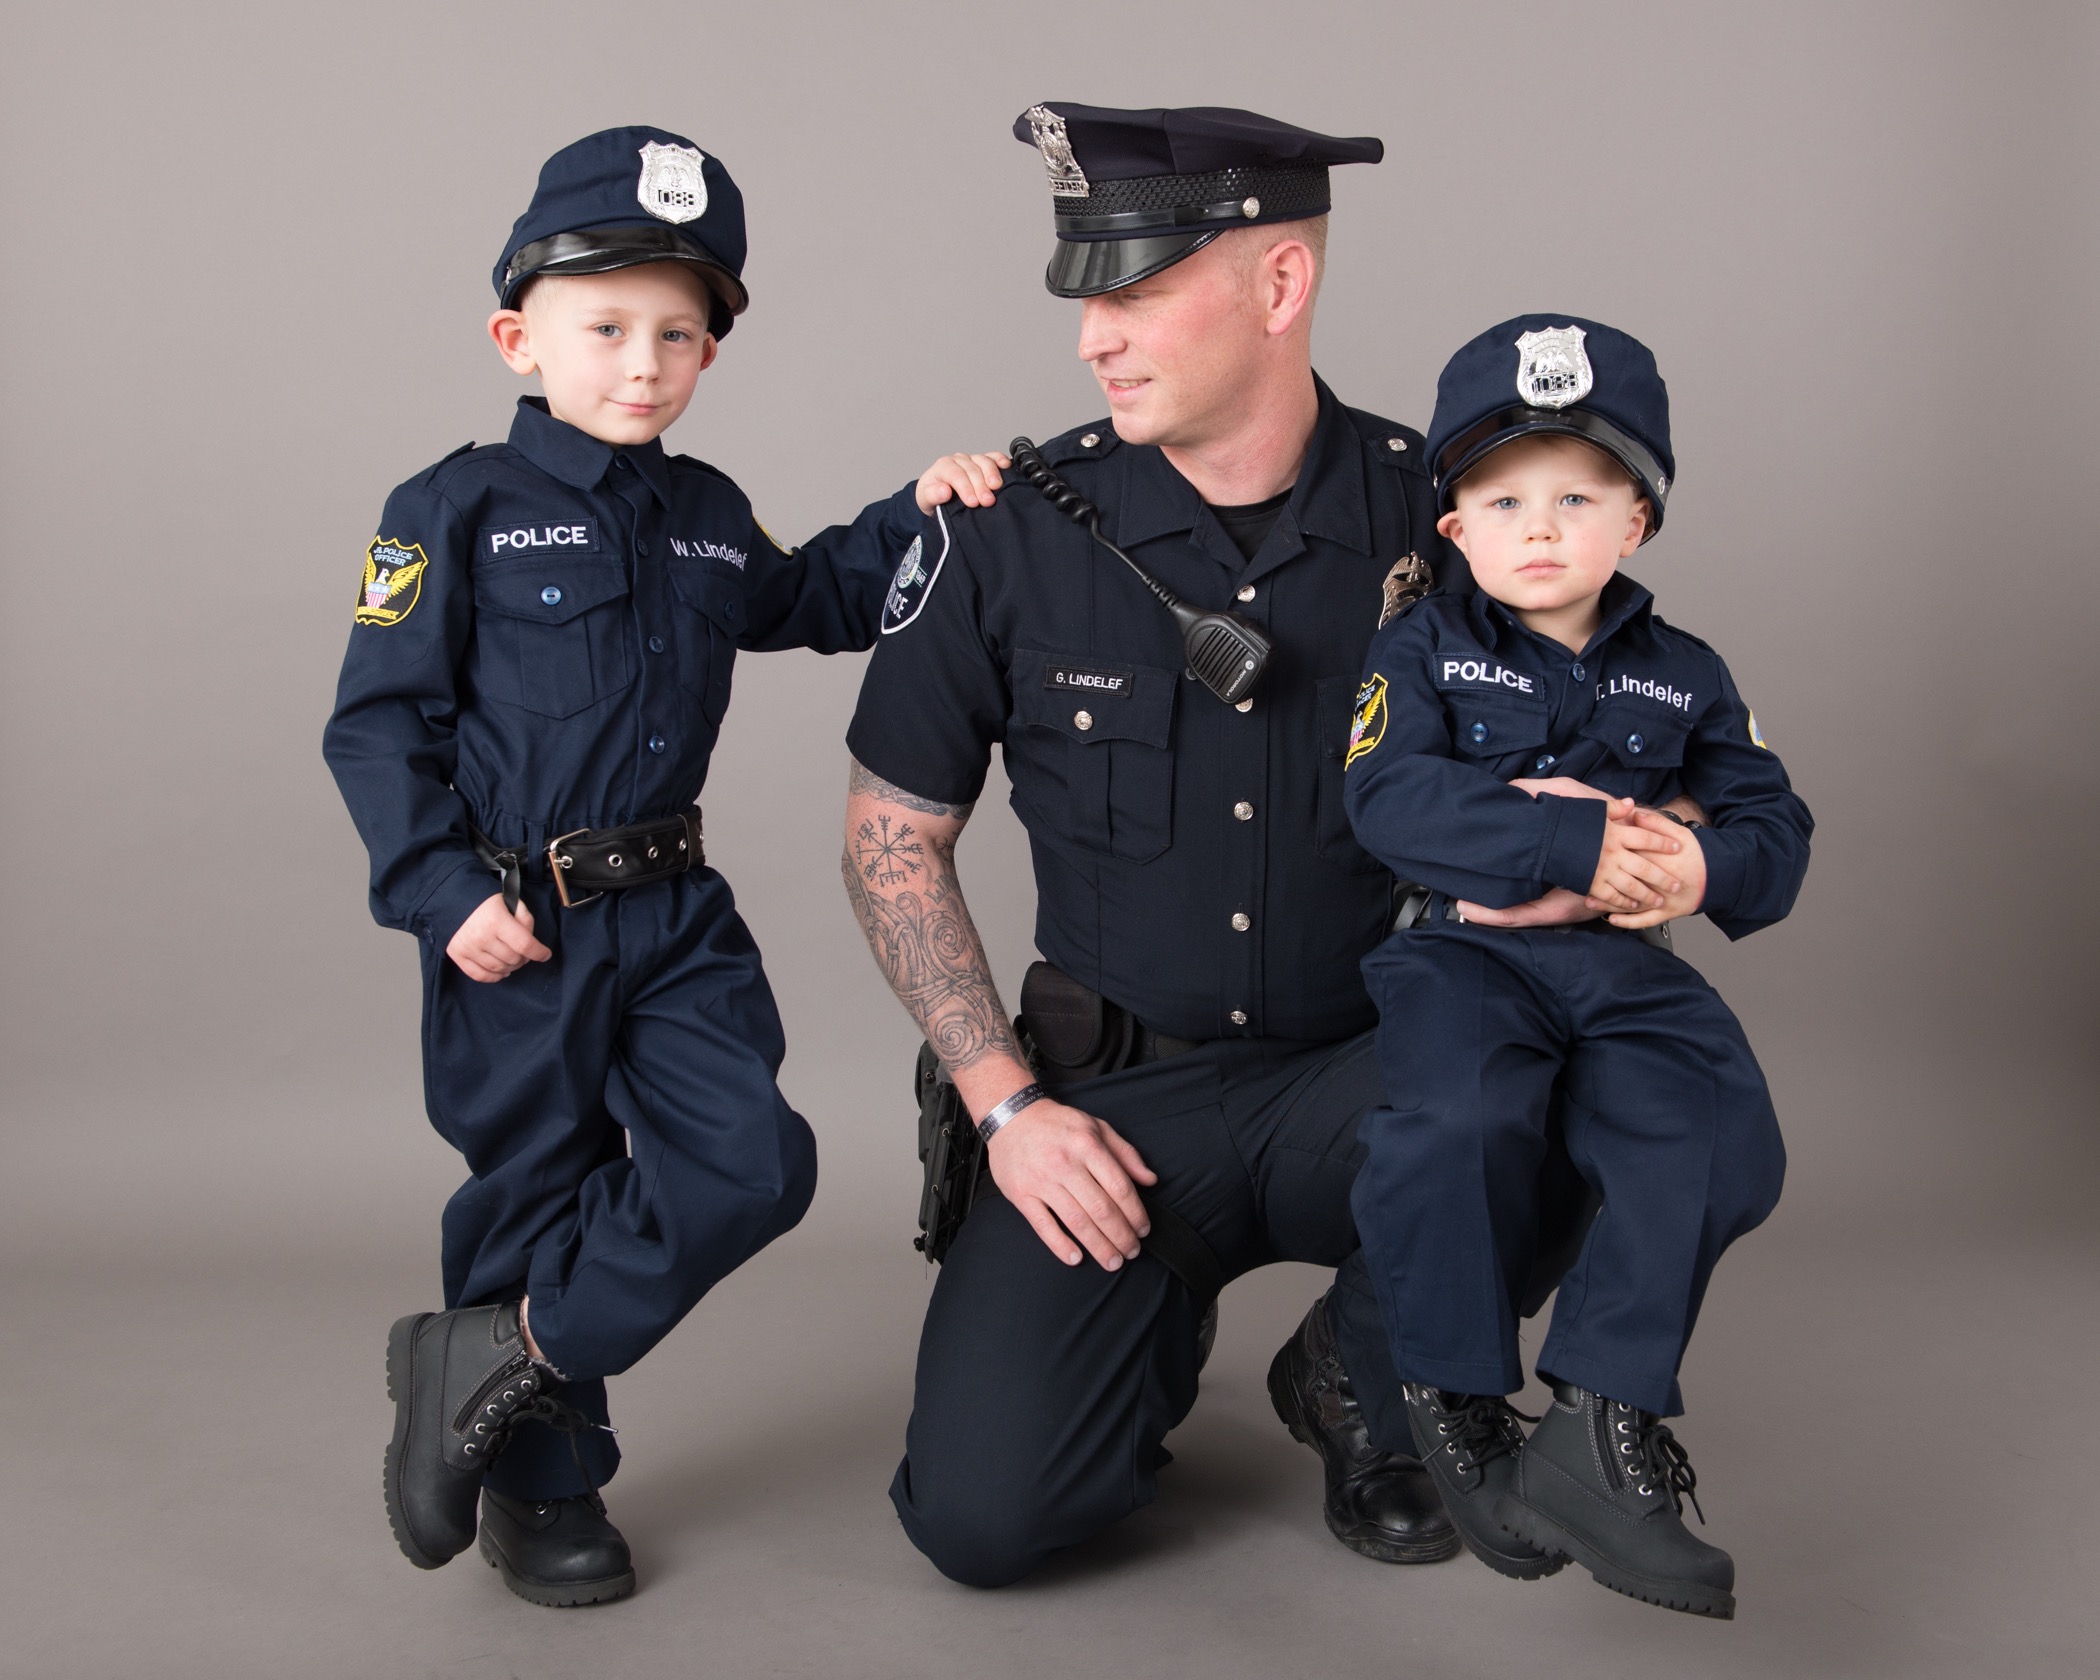 Dress Up America Police Officer Costume for Girls - Small